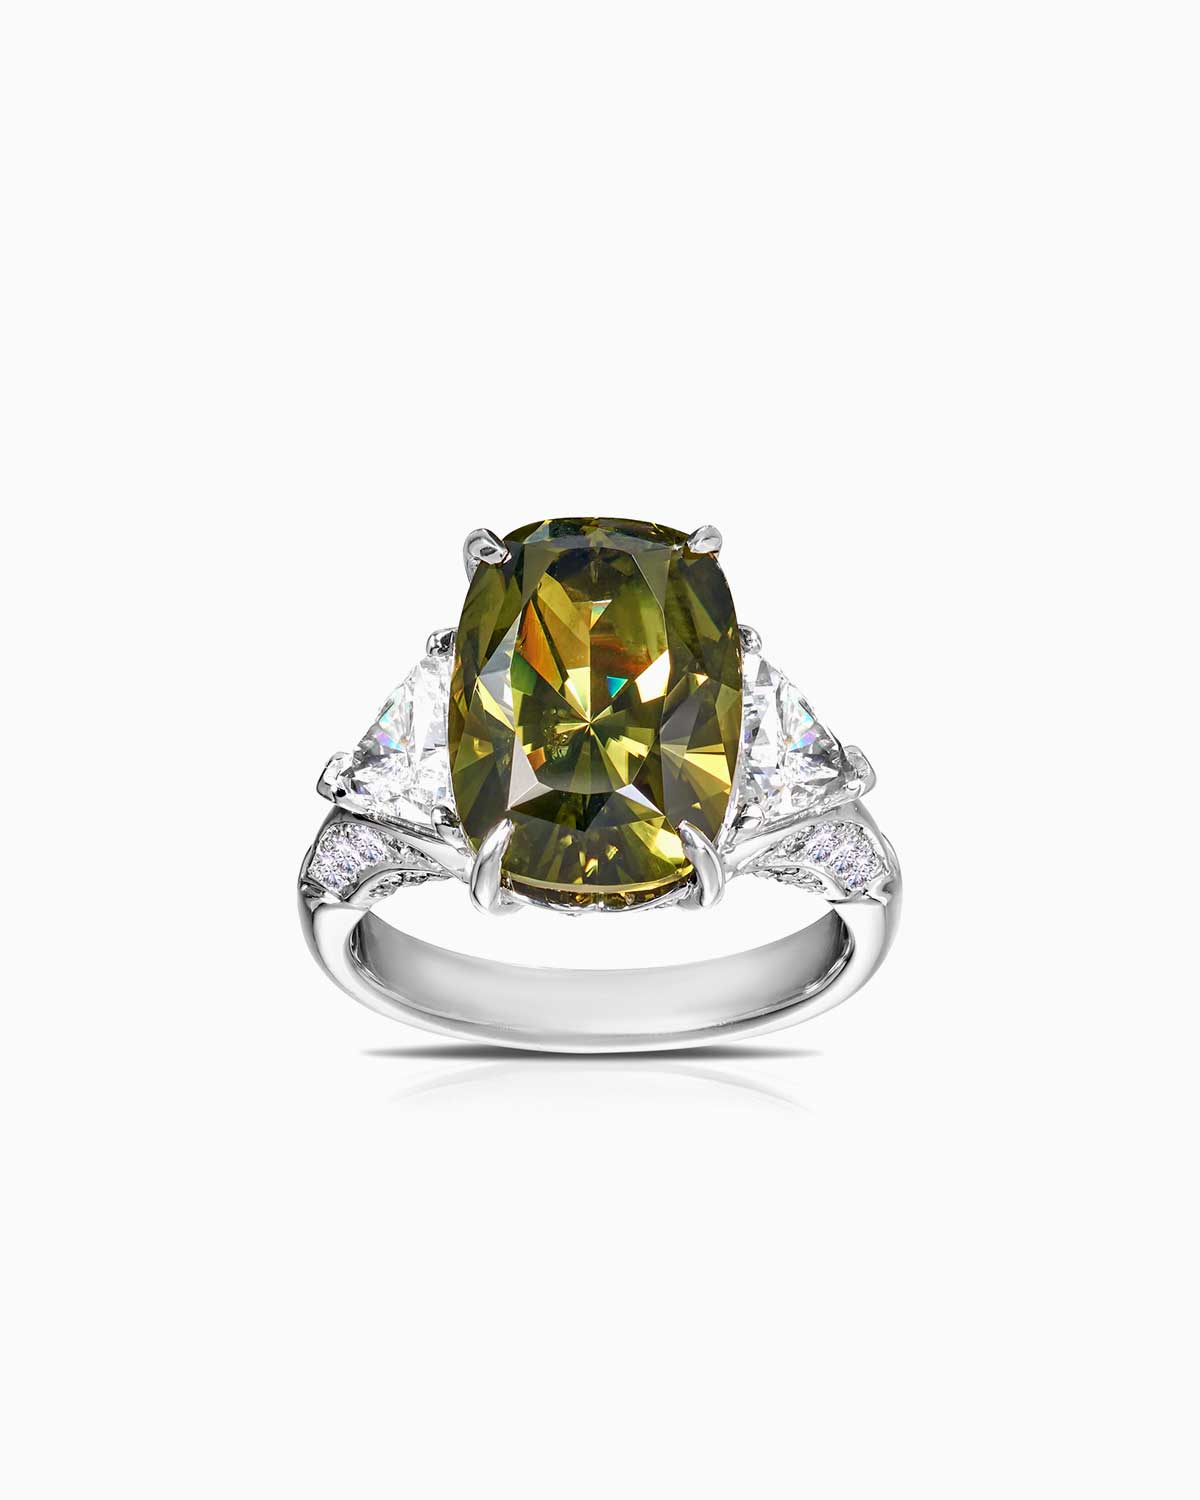 8.08ct Australian green sapphire trilogy featuring GIA certified triangle cut diamonds and set in 18 karat white gold by claude and me jewellery.